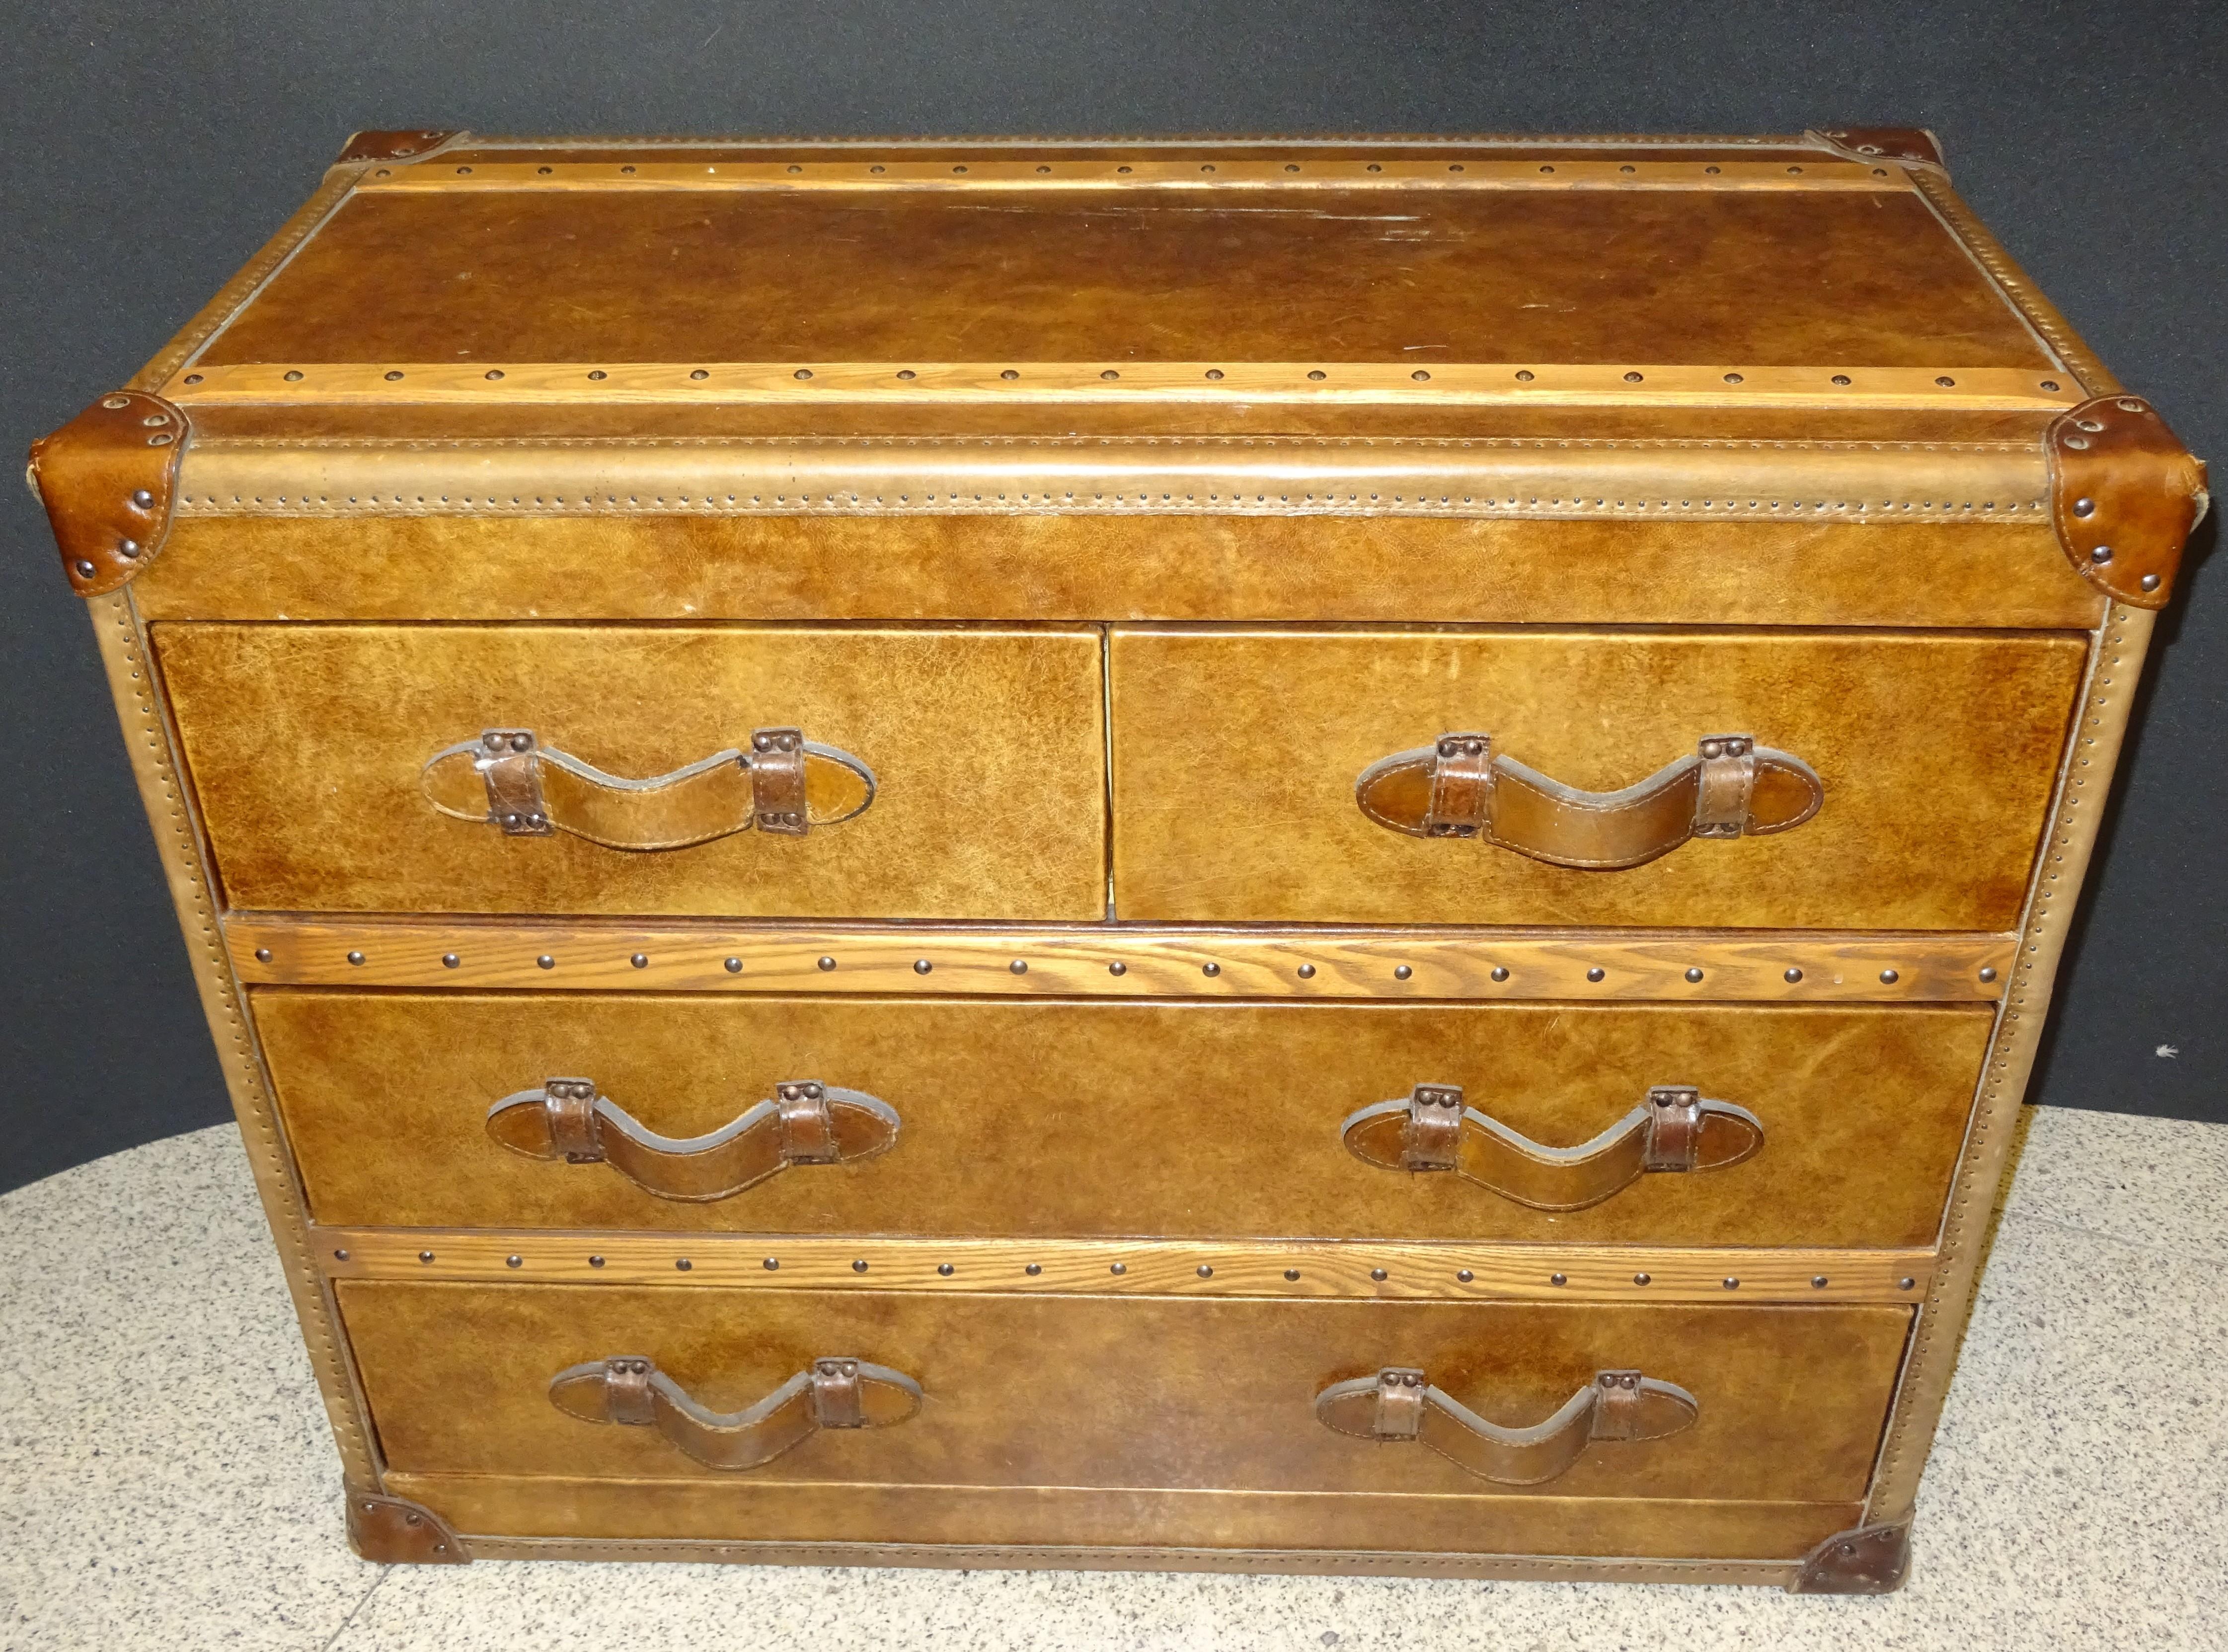 Amazing Flamant French wood and leather chest of drawers, in a very good condition, English colonial style trunk. In an elegant cognac color with the interiors draws upholstered in a soft green color.
It has handles and 4 draws.
It comes from